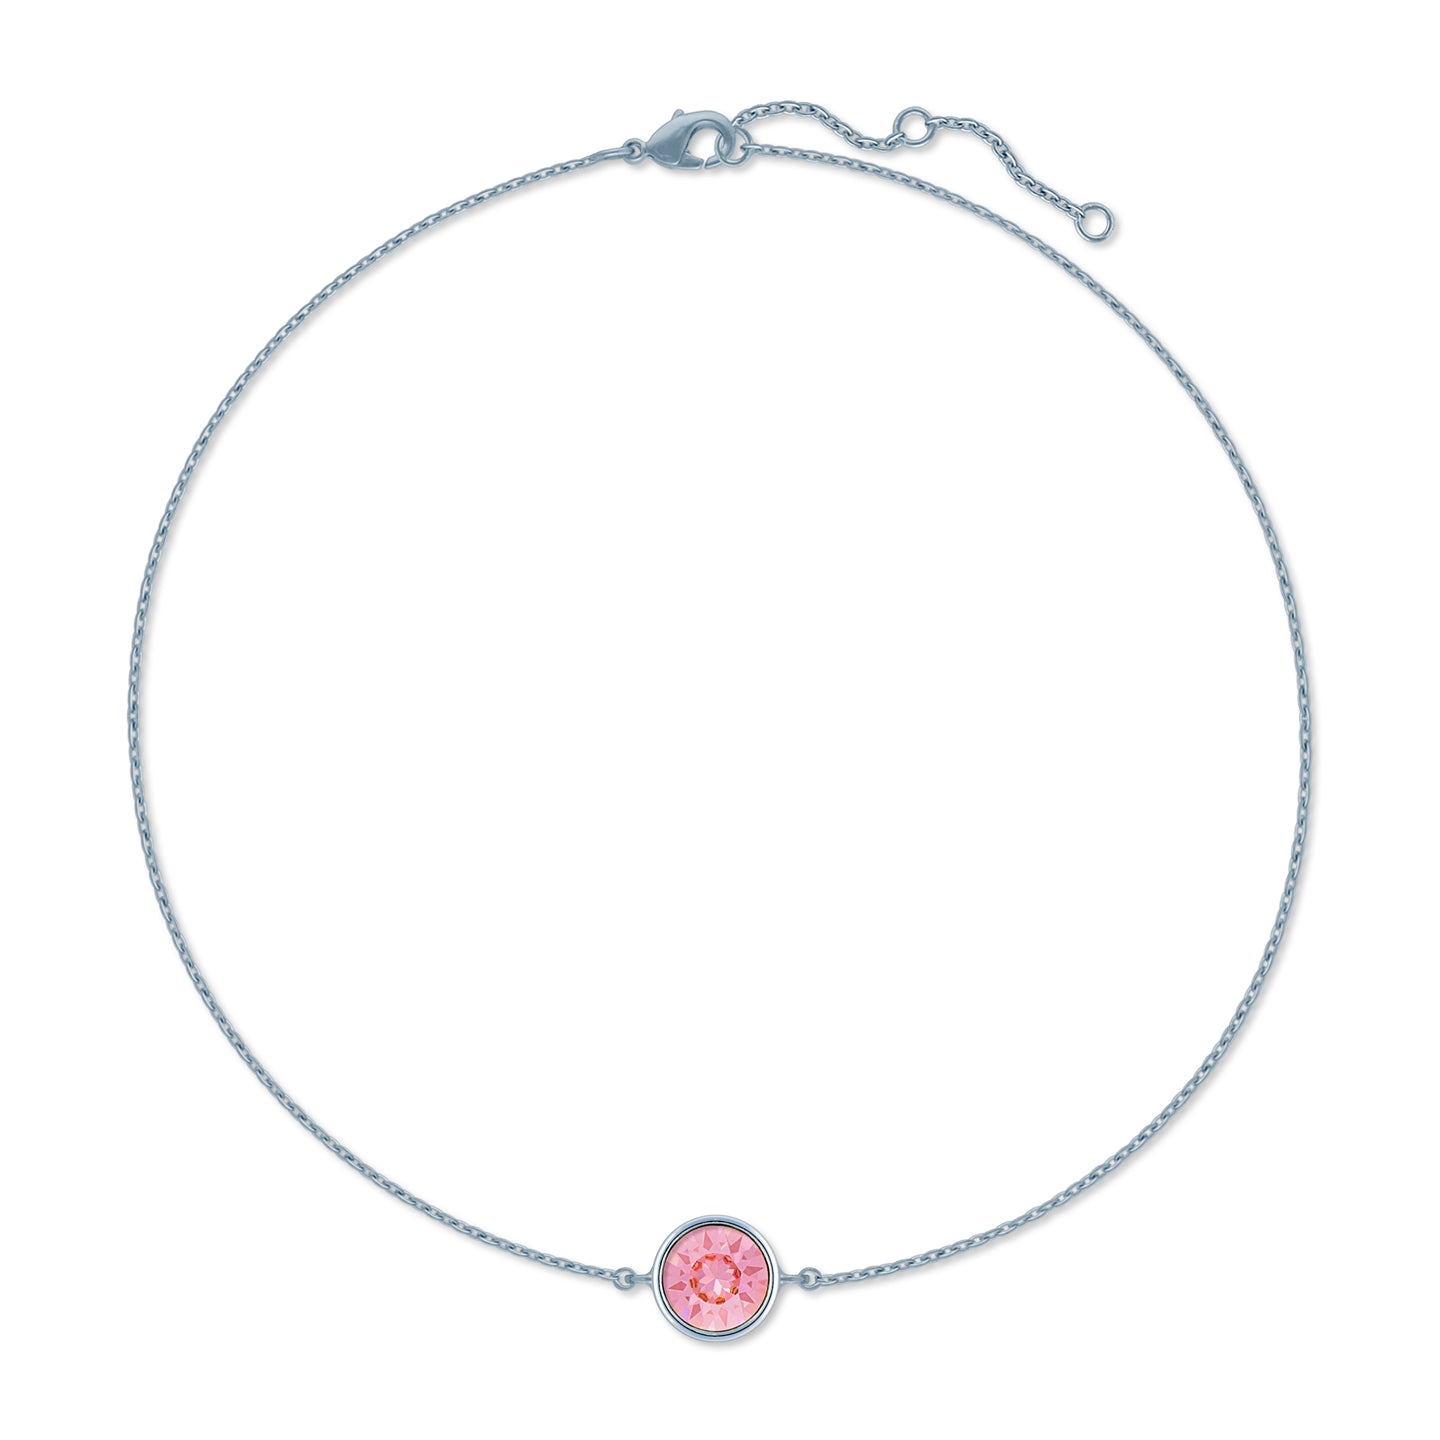 Harley Chain Bracelet with Pink Light Rose Round Crystals from Swarovski Silver Toned Rhodium Plated - Ed Heart